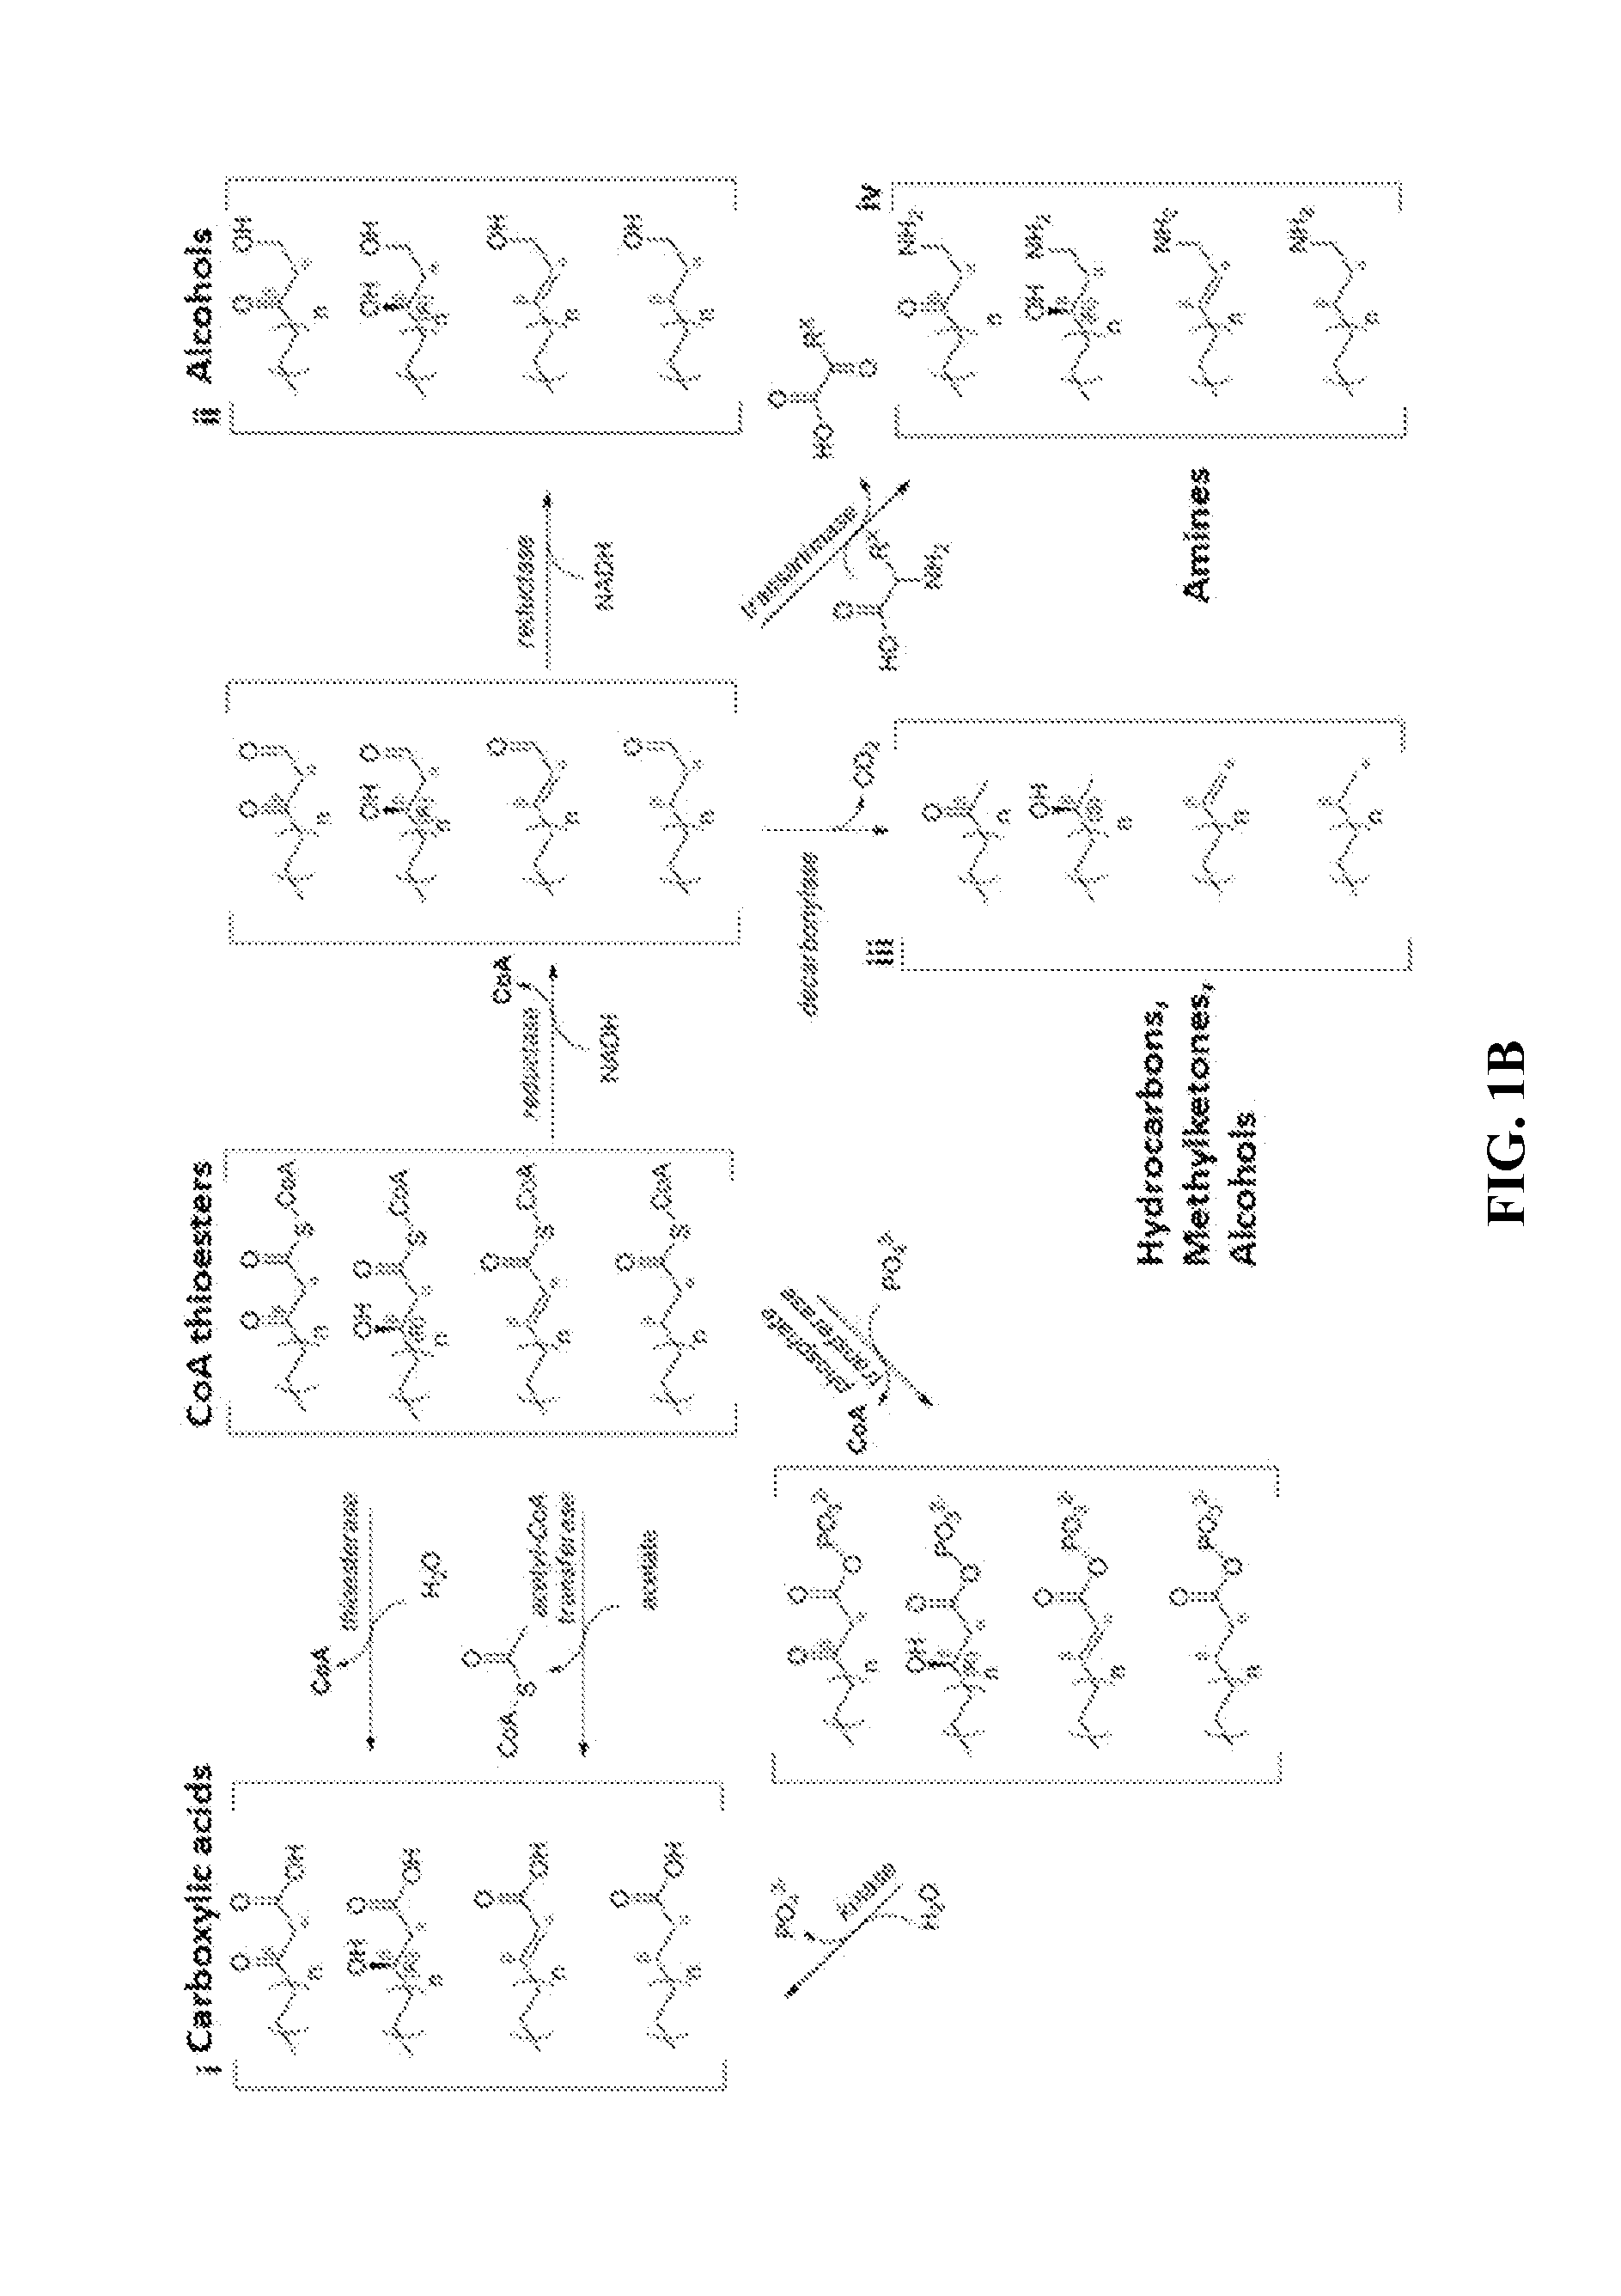 Type ii fatty acid synthesis enzymes in reverse ß-oxidation